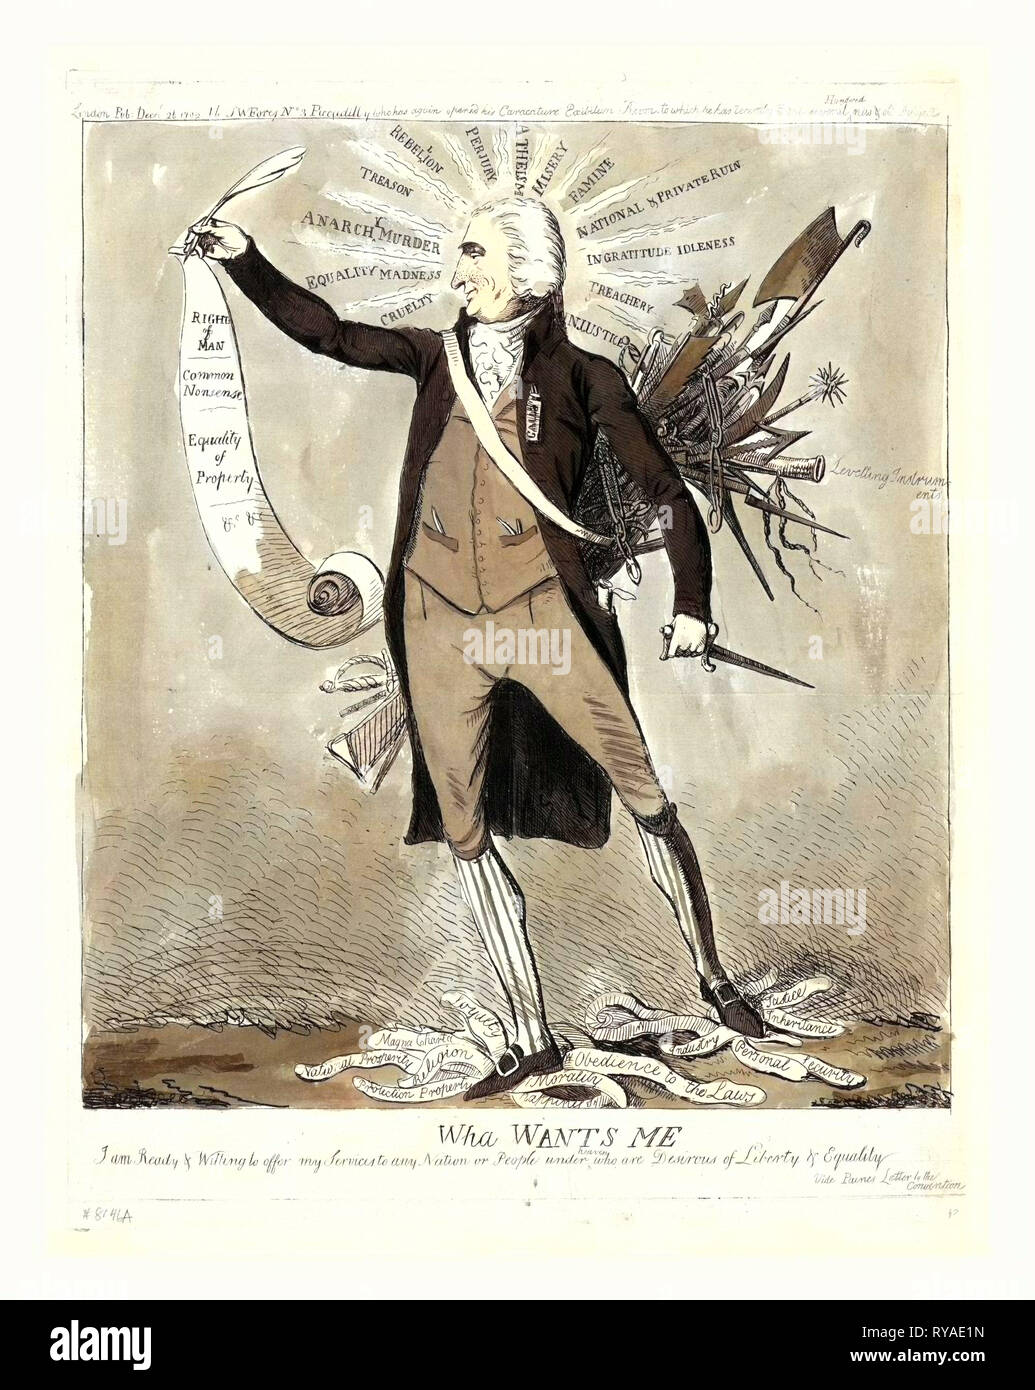 Wha Wants Me, London : 1792, Engraving, Thomas Paine, Full-Length, Standing, Facing Left, Holding Scroll Rights of Man, Surrounded by Injustices and Standing on Labels, Representing Morals and Justices, Defending Measures Taken in Revolutionary France and Appealing to the English to Overthrow Their Monarchy and Organize a Republic Stock Photo